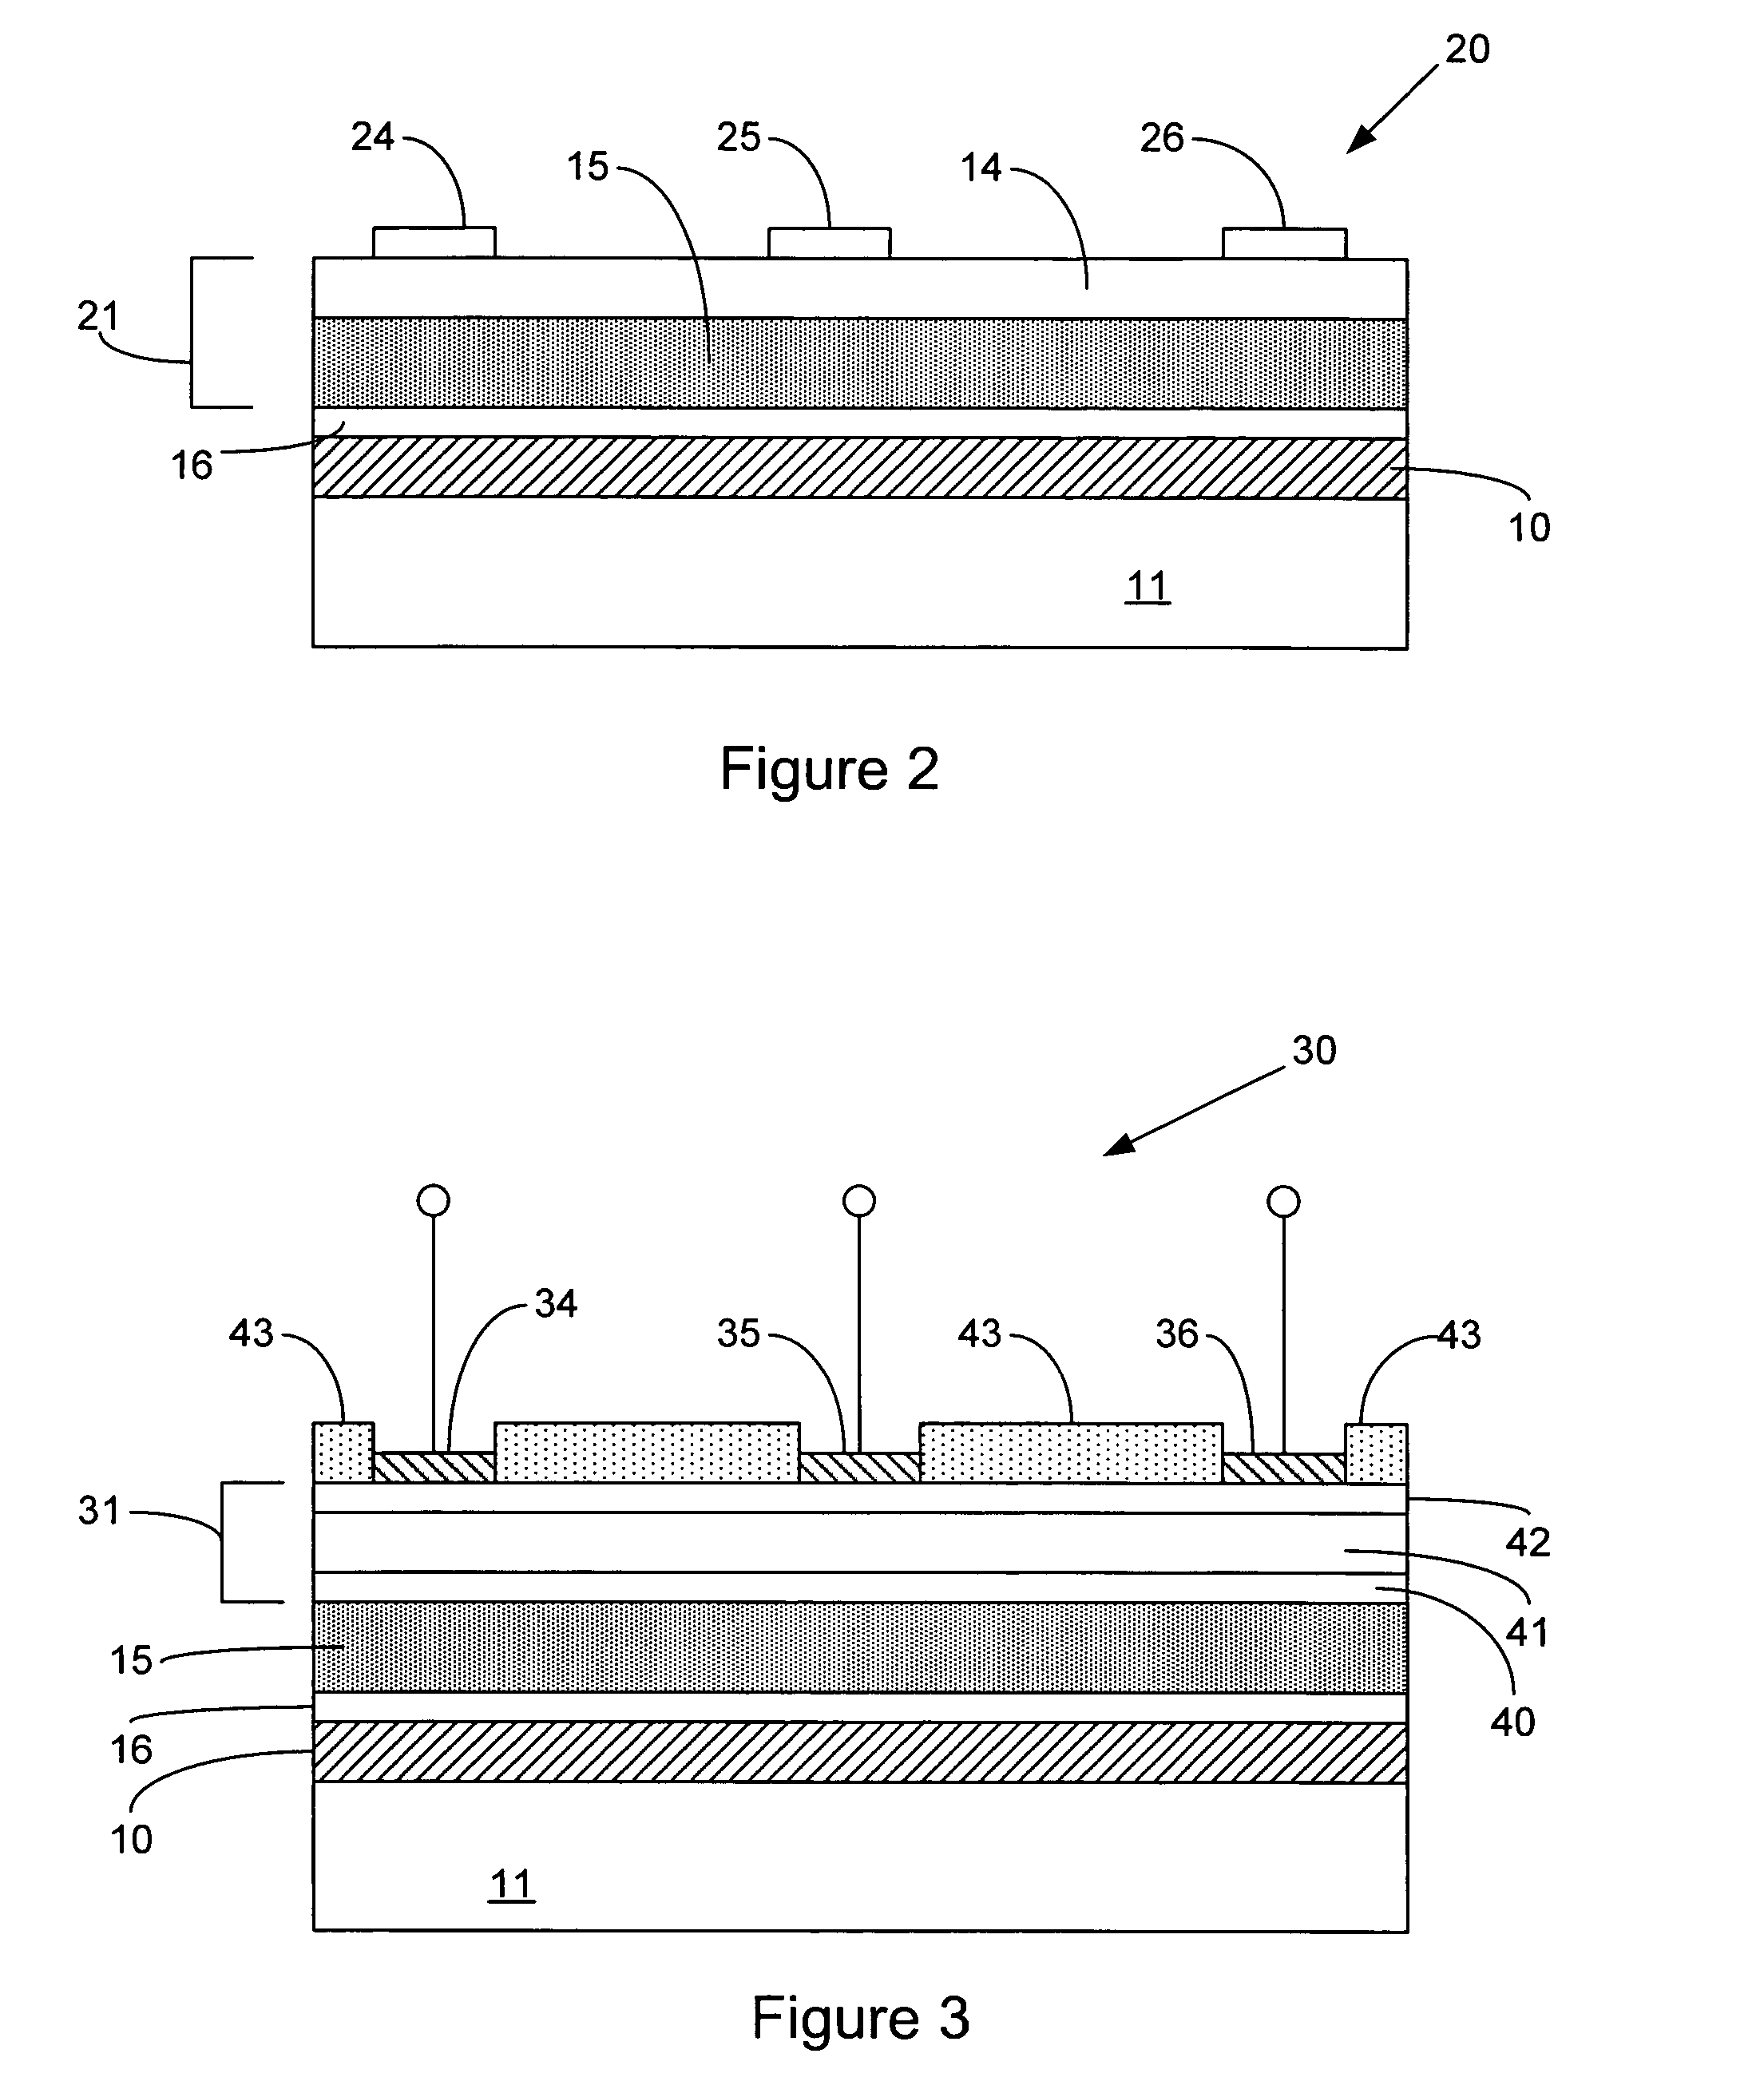 Silicon Carbide on Diamond Substrates and Related Devices and Methods